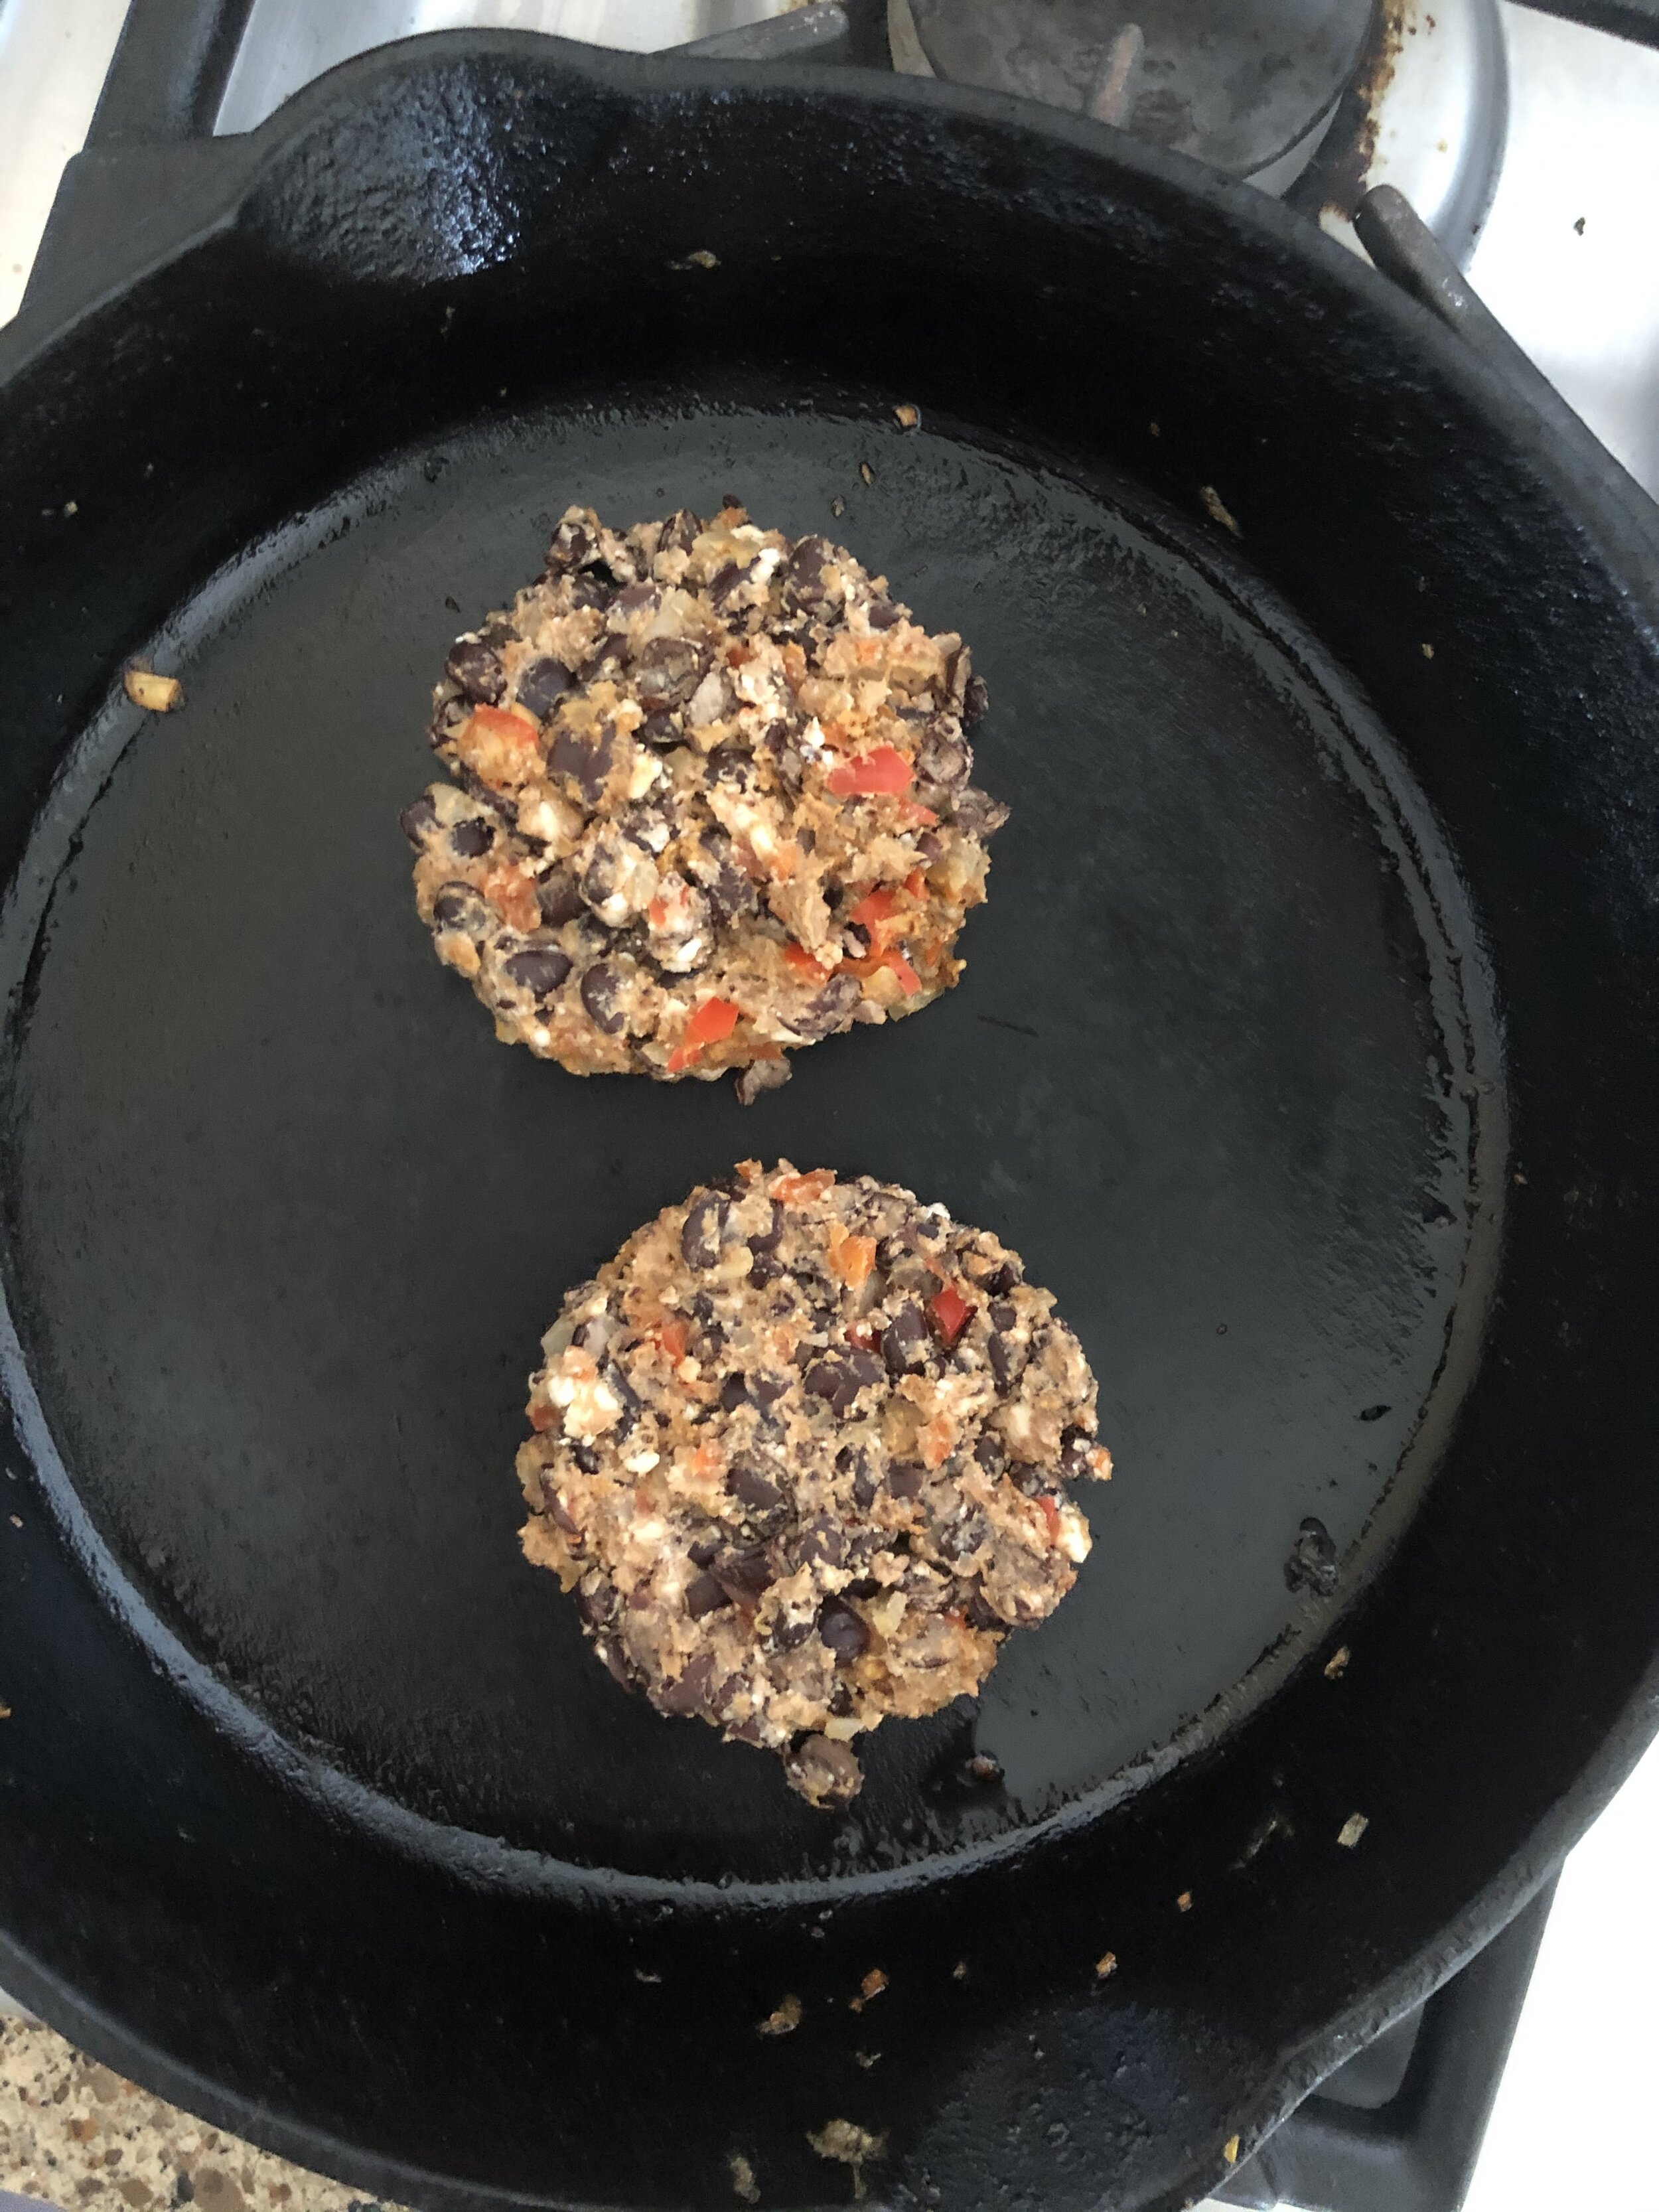 Cooking black bean burgers in cast iron